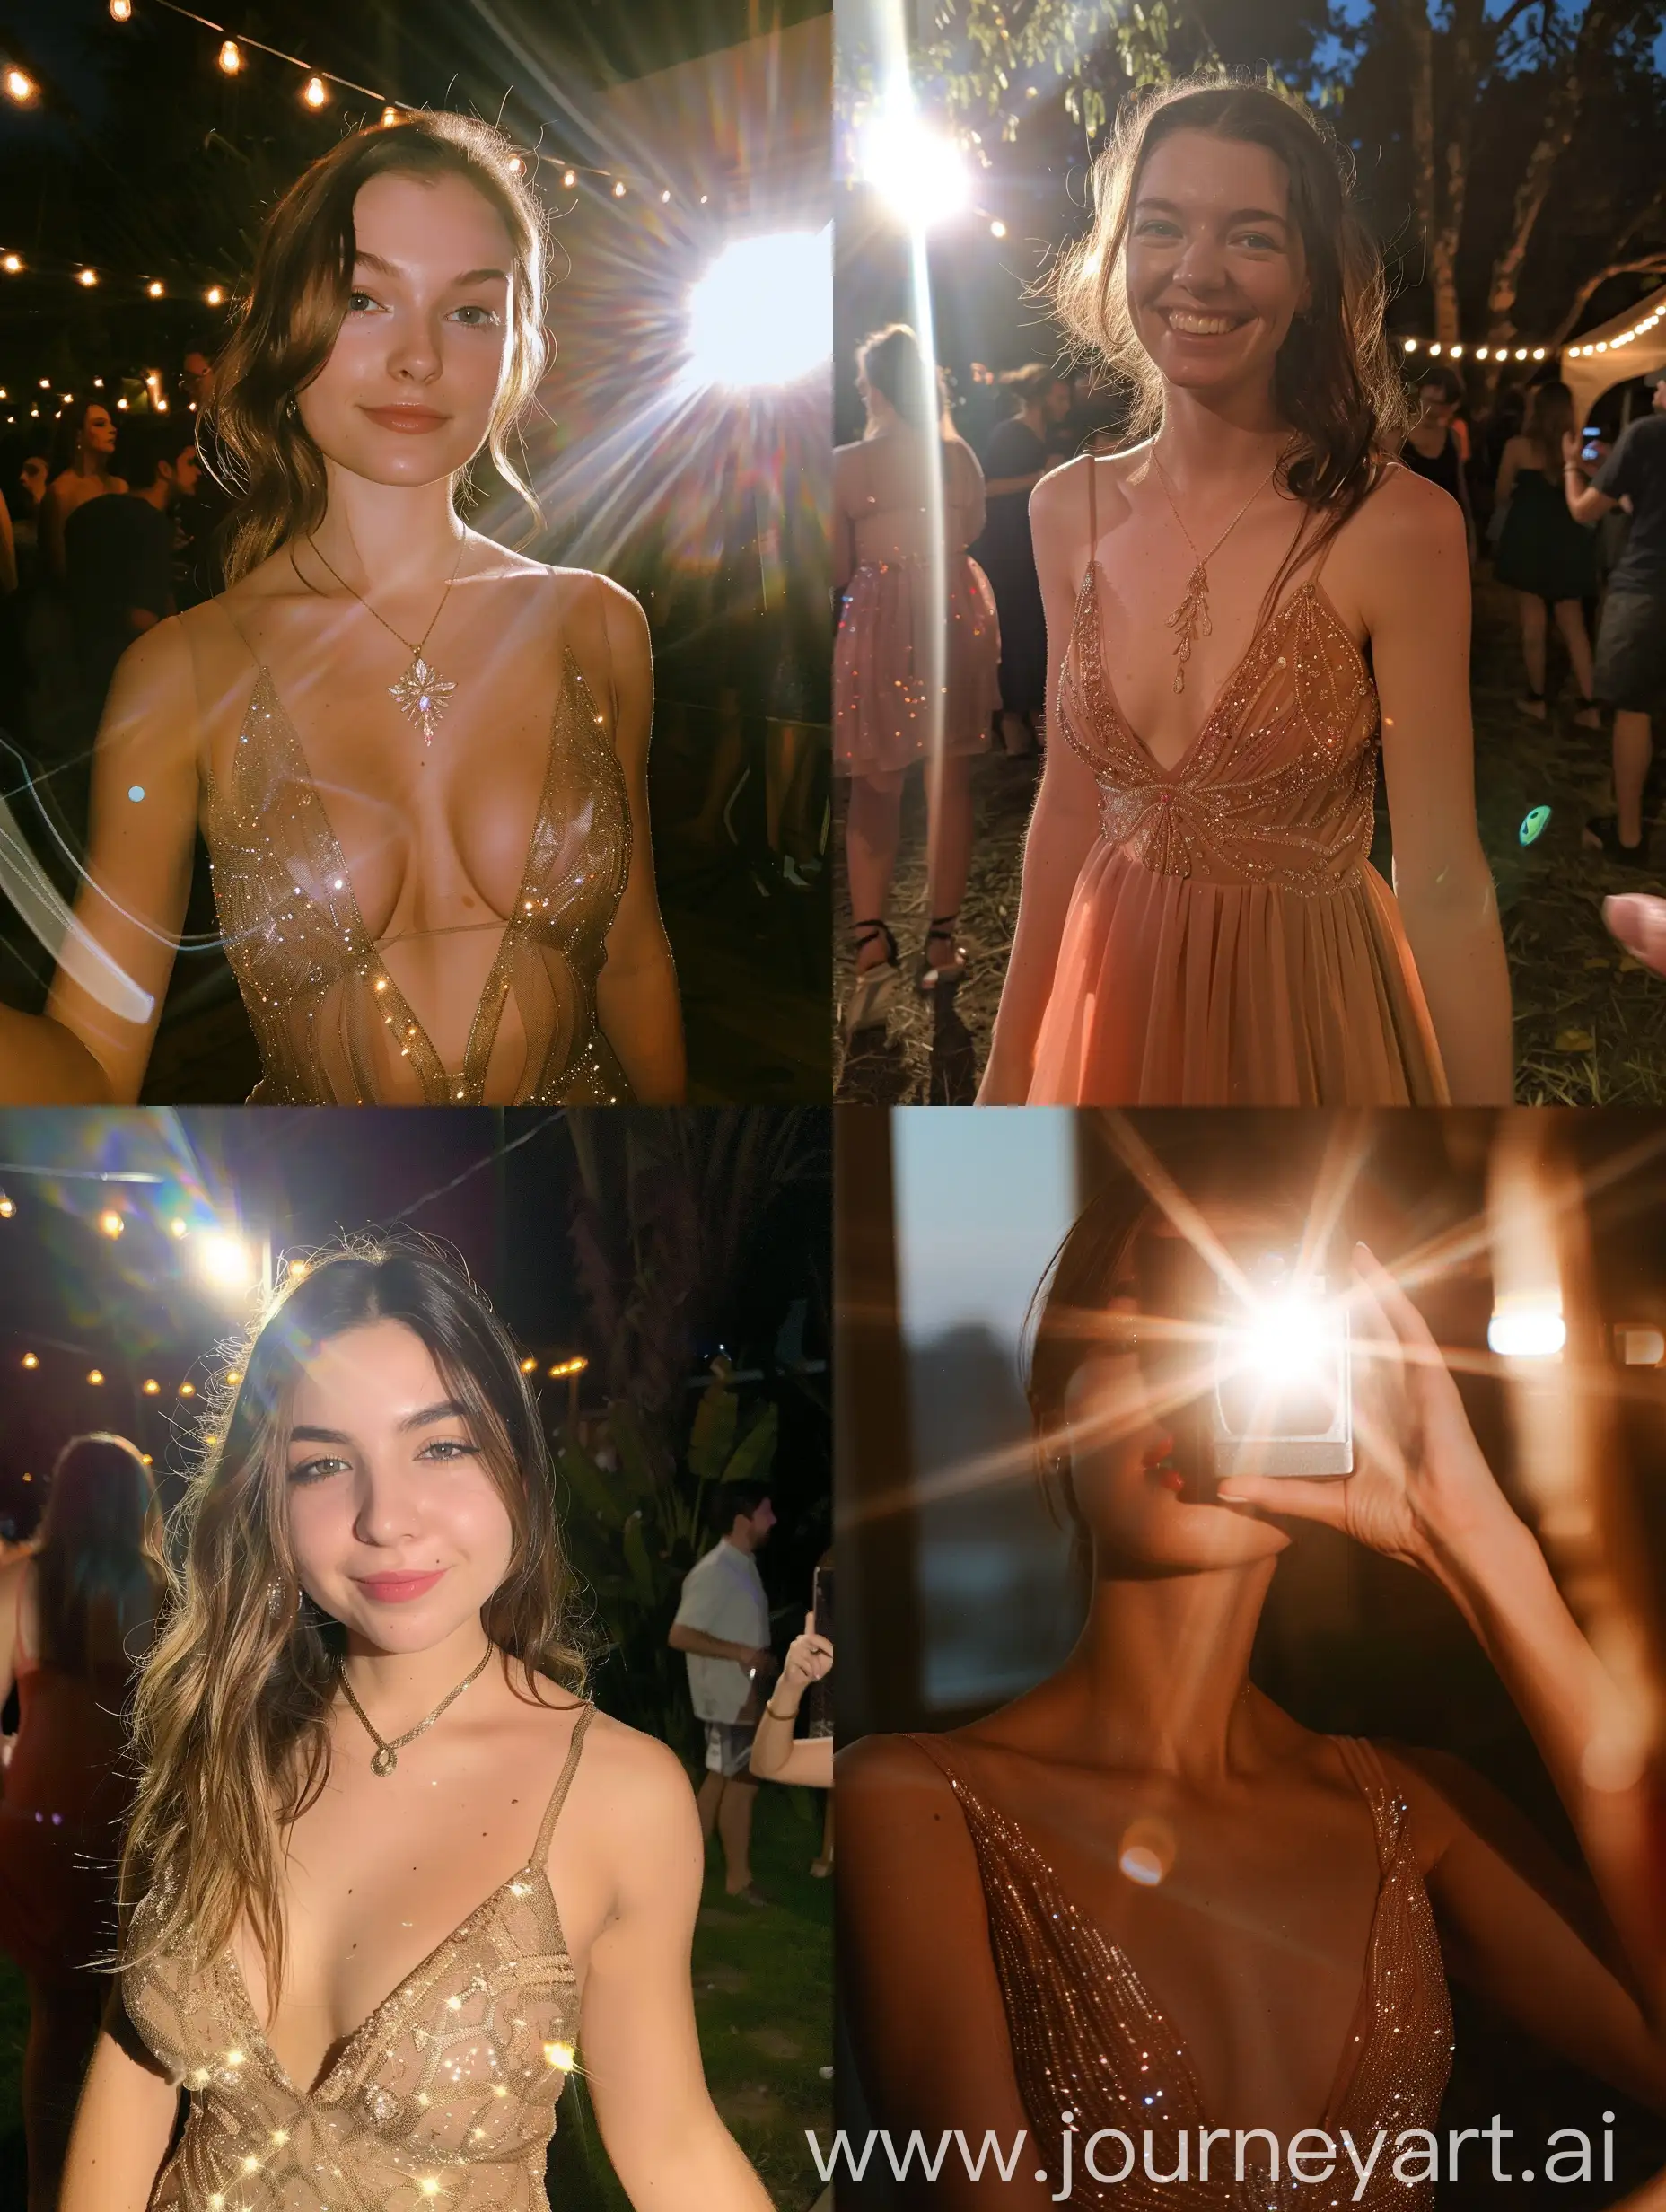 at party, at night, wearing a dress, camera flash, flash light, selfie